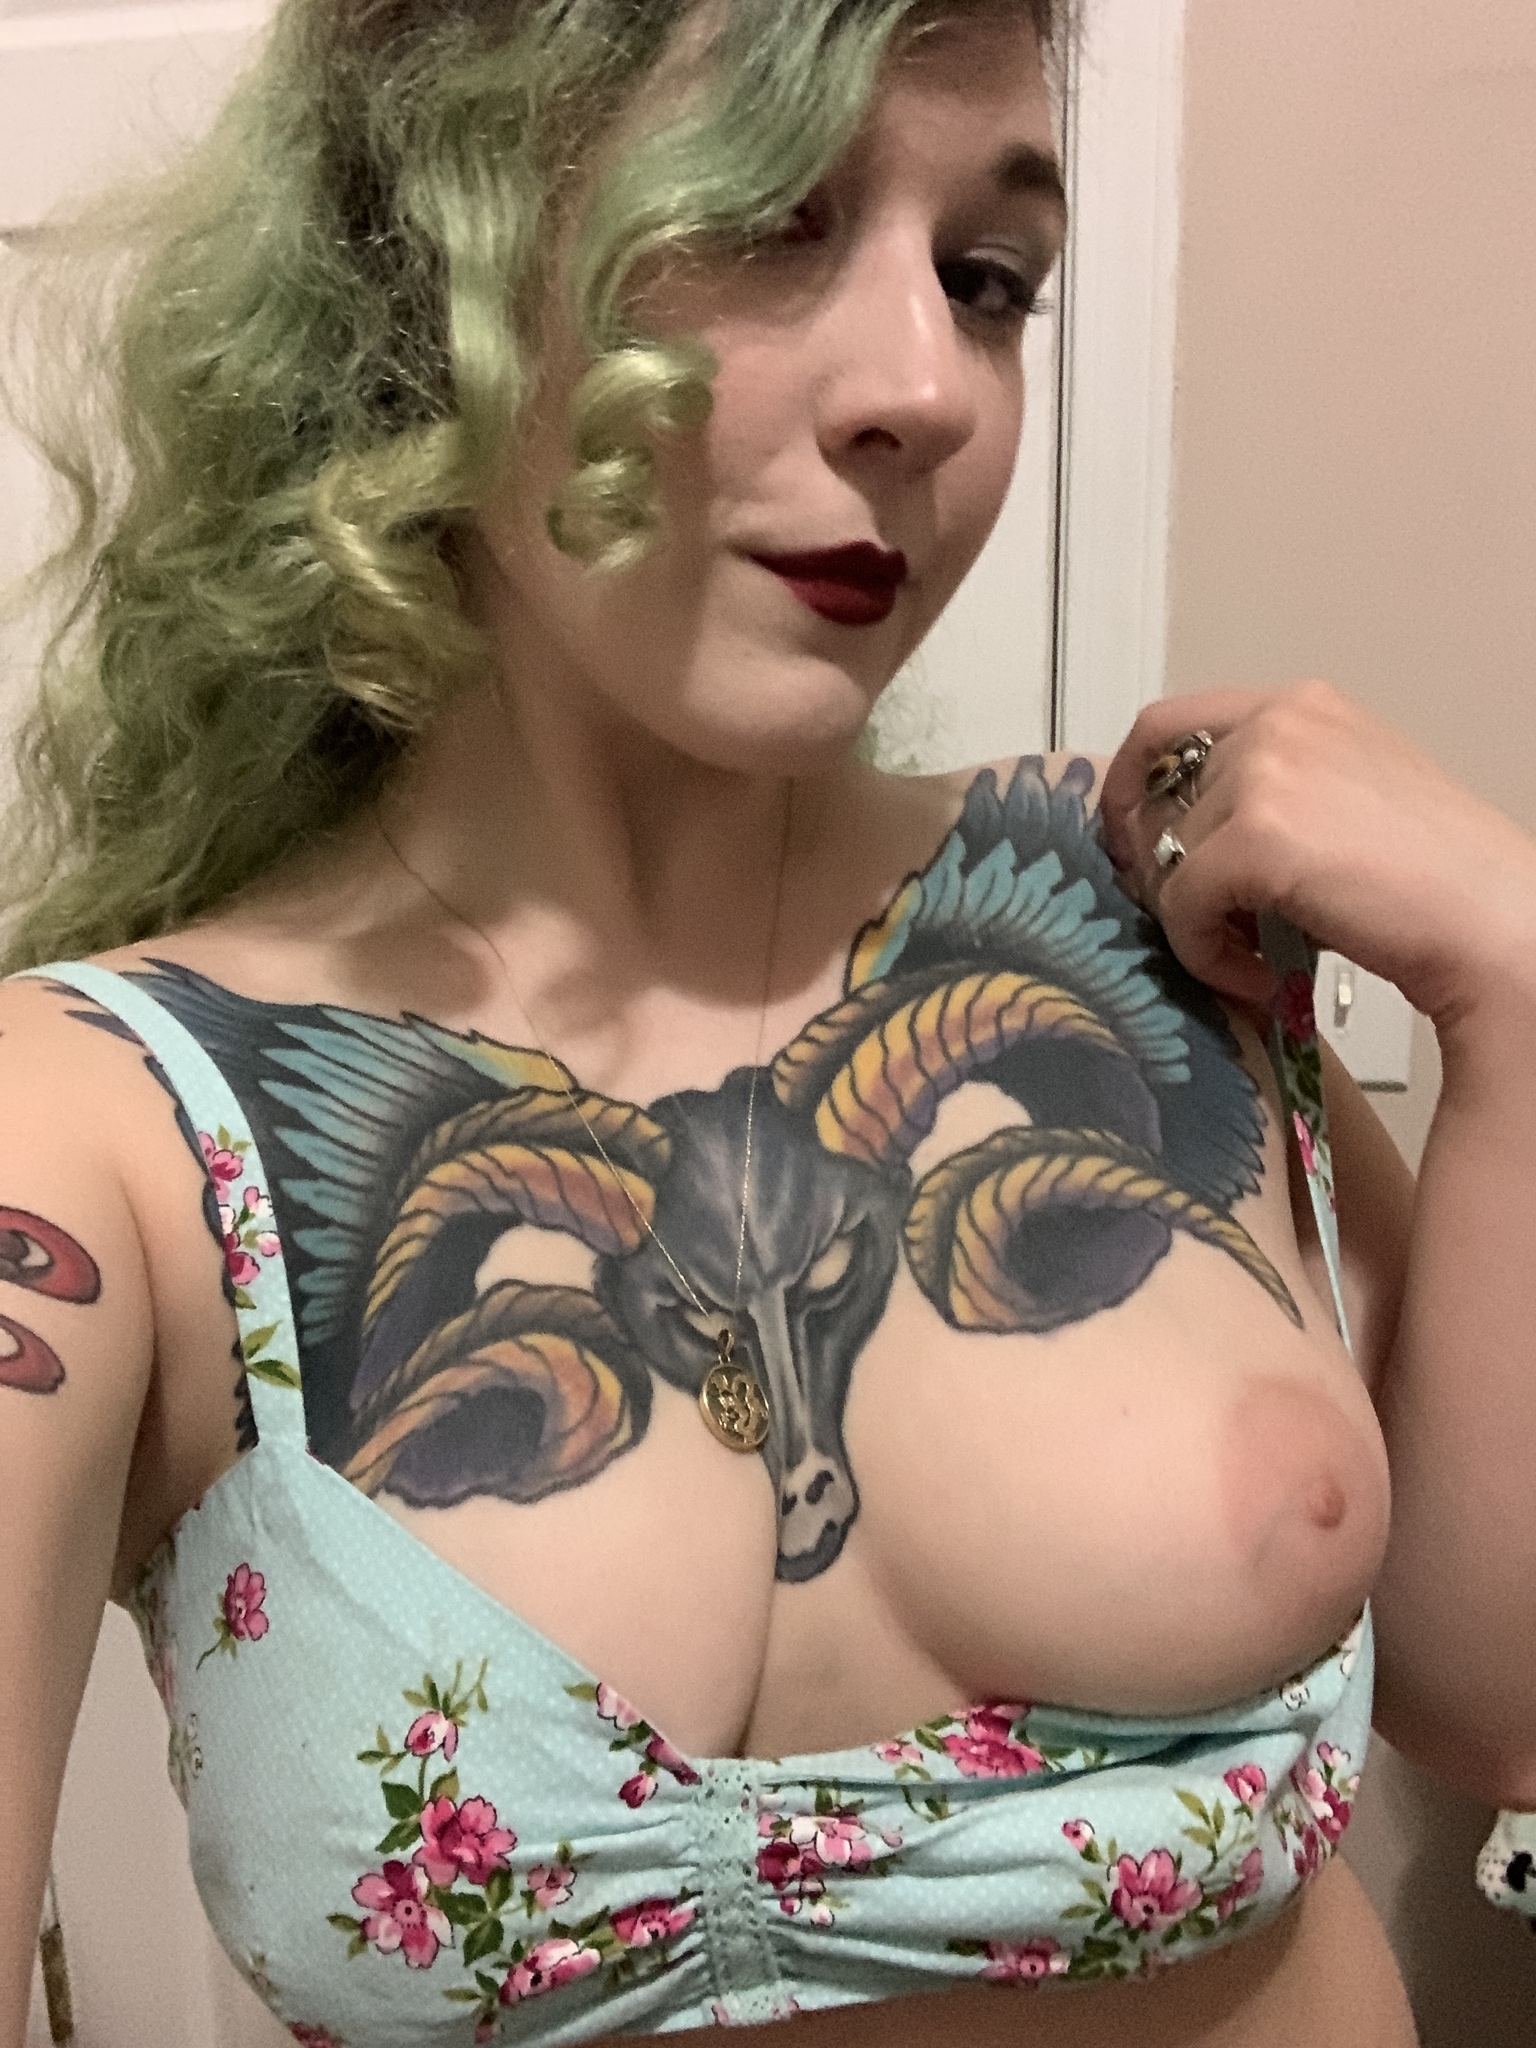 Made a vintage bra and damned if it isnâ€™t the comfiest thing Iâ€™ve ever worn Porn